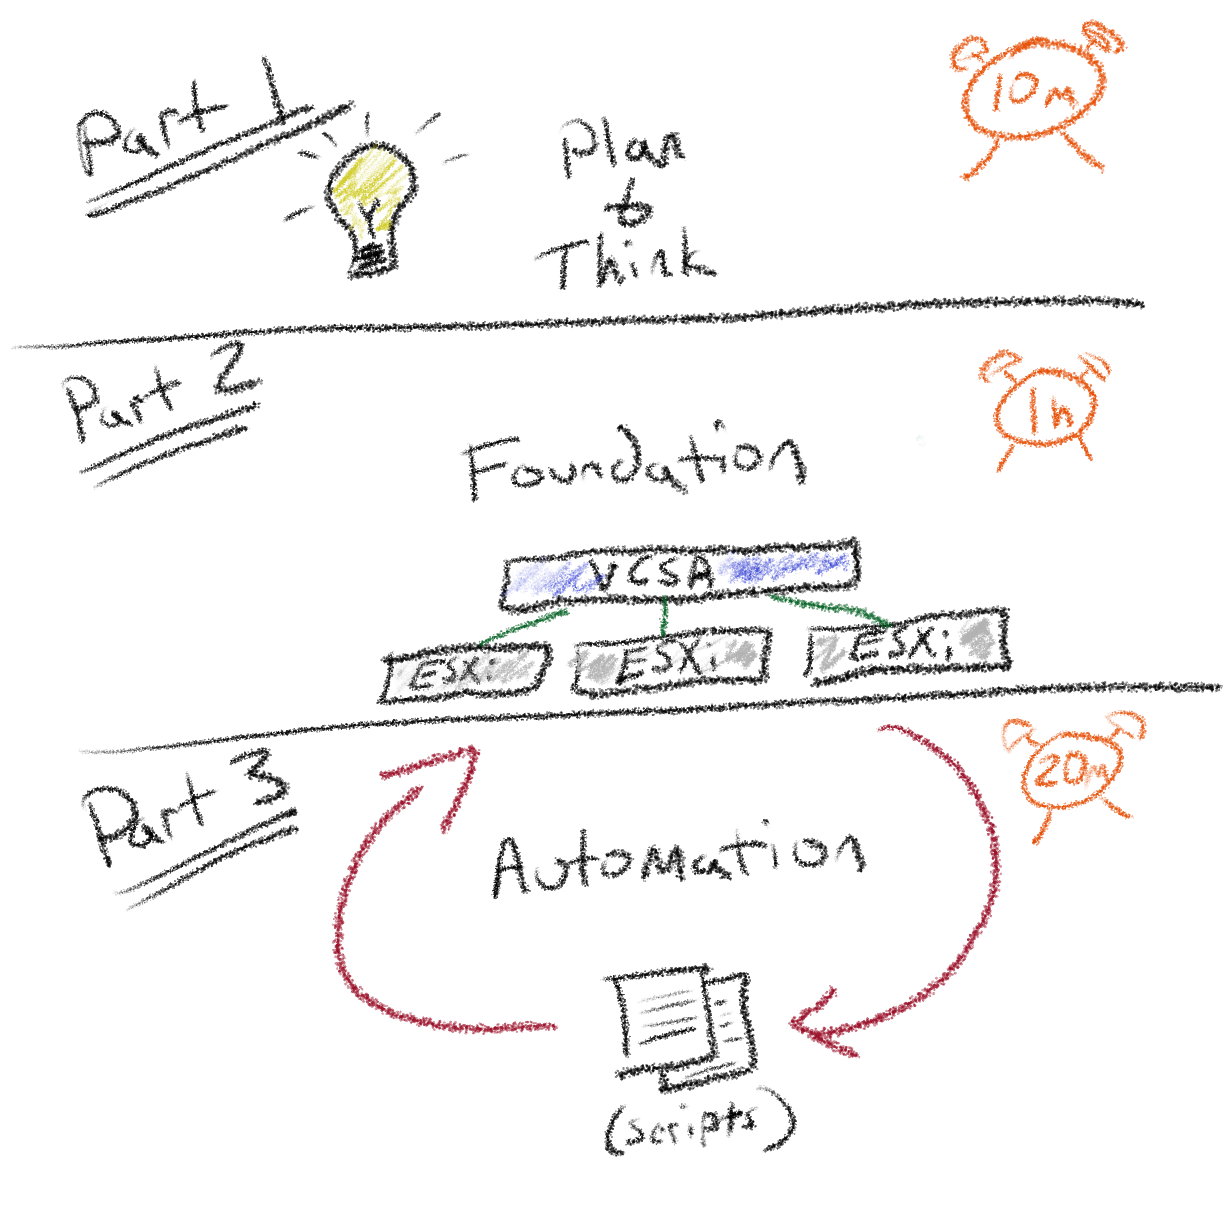 learning plan outlined into three steps of planning, foundation, and automation